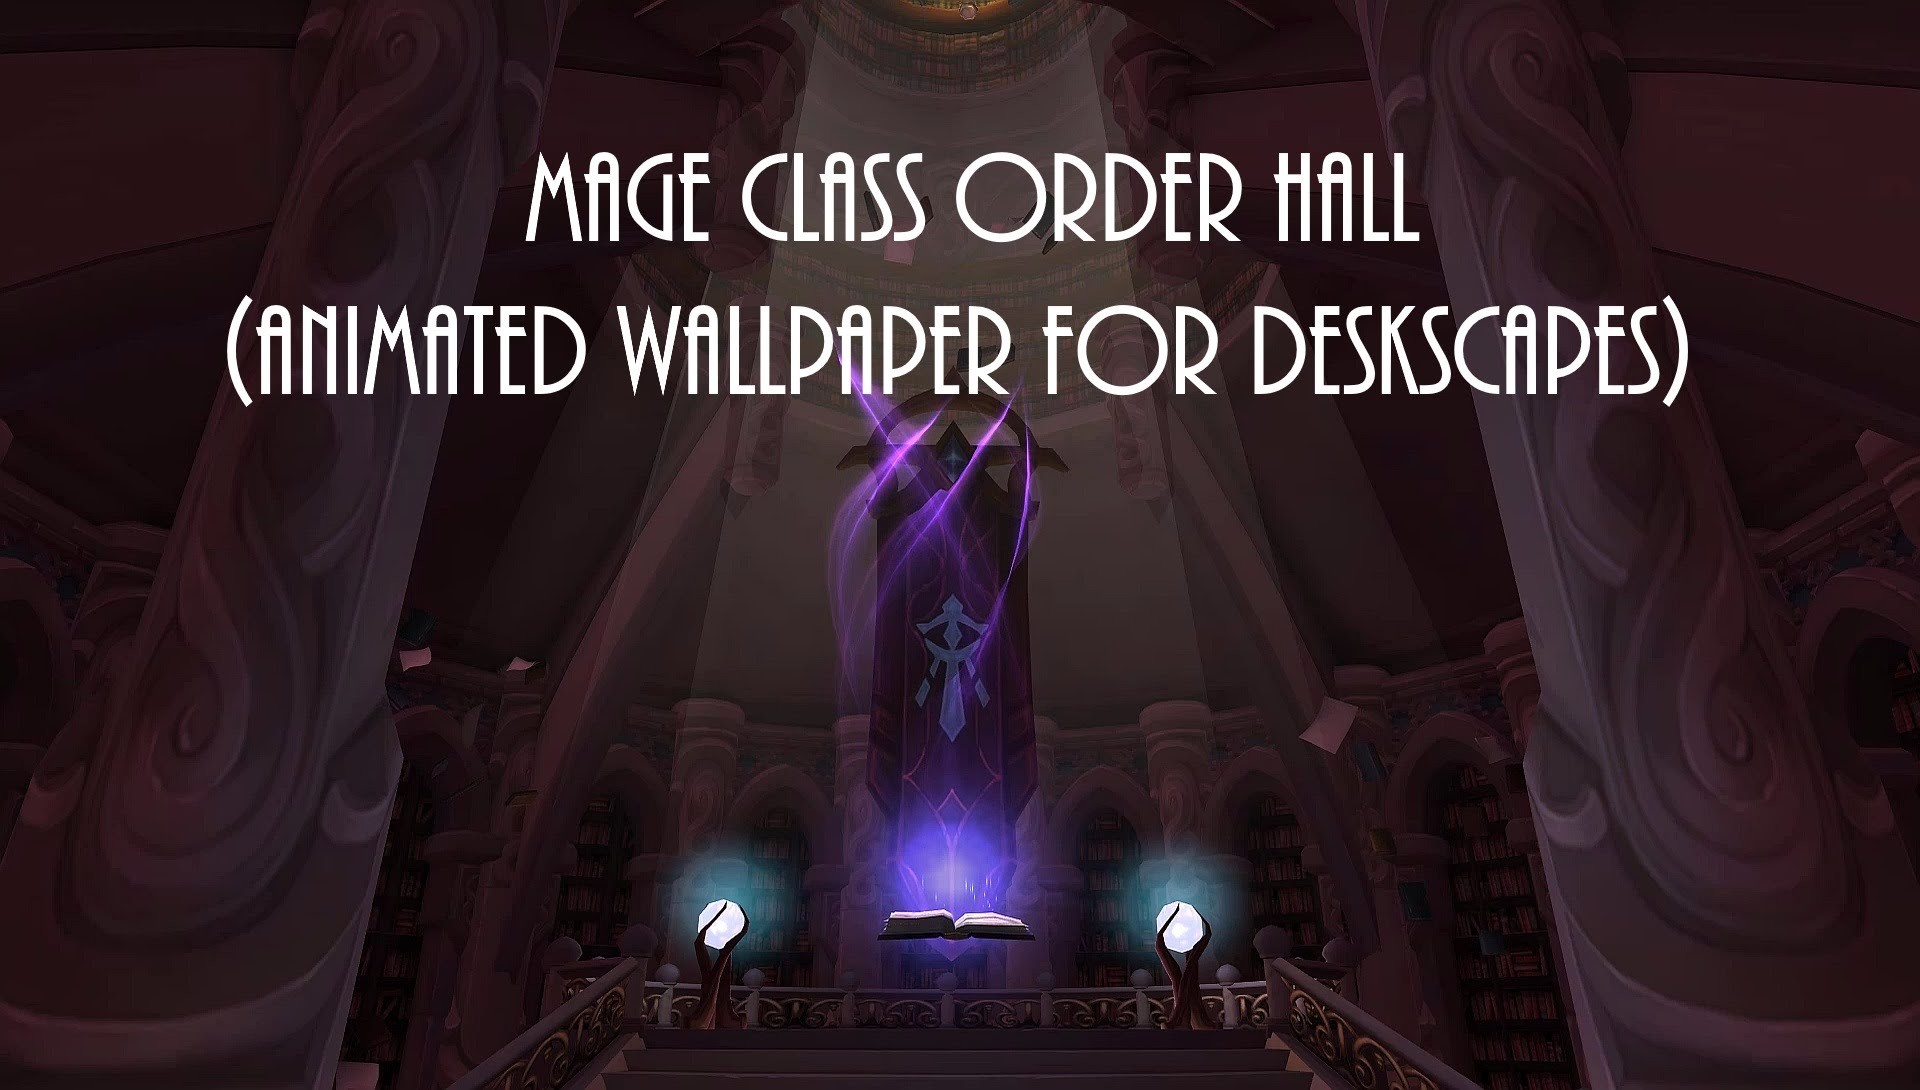 World of Warcraft Legion Mage Hall animated wallpaper for Deskscapes